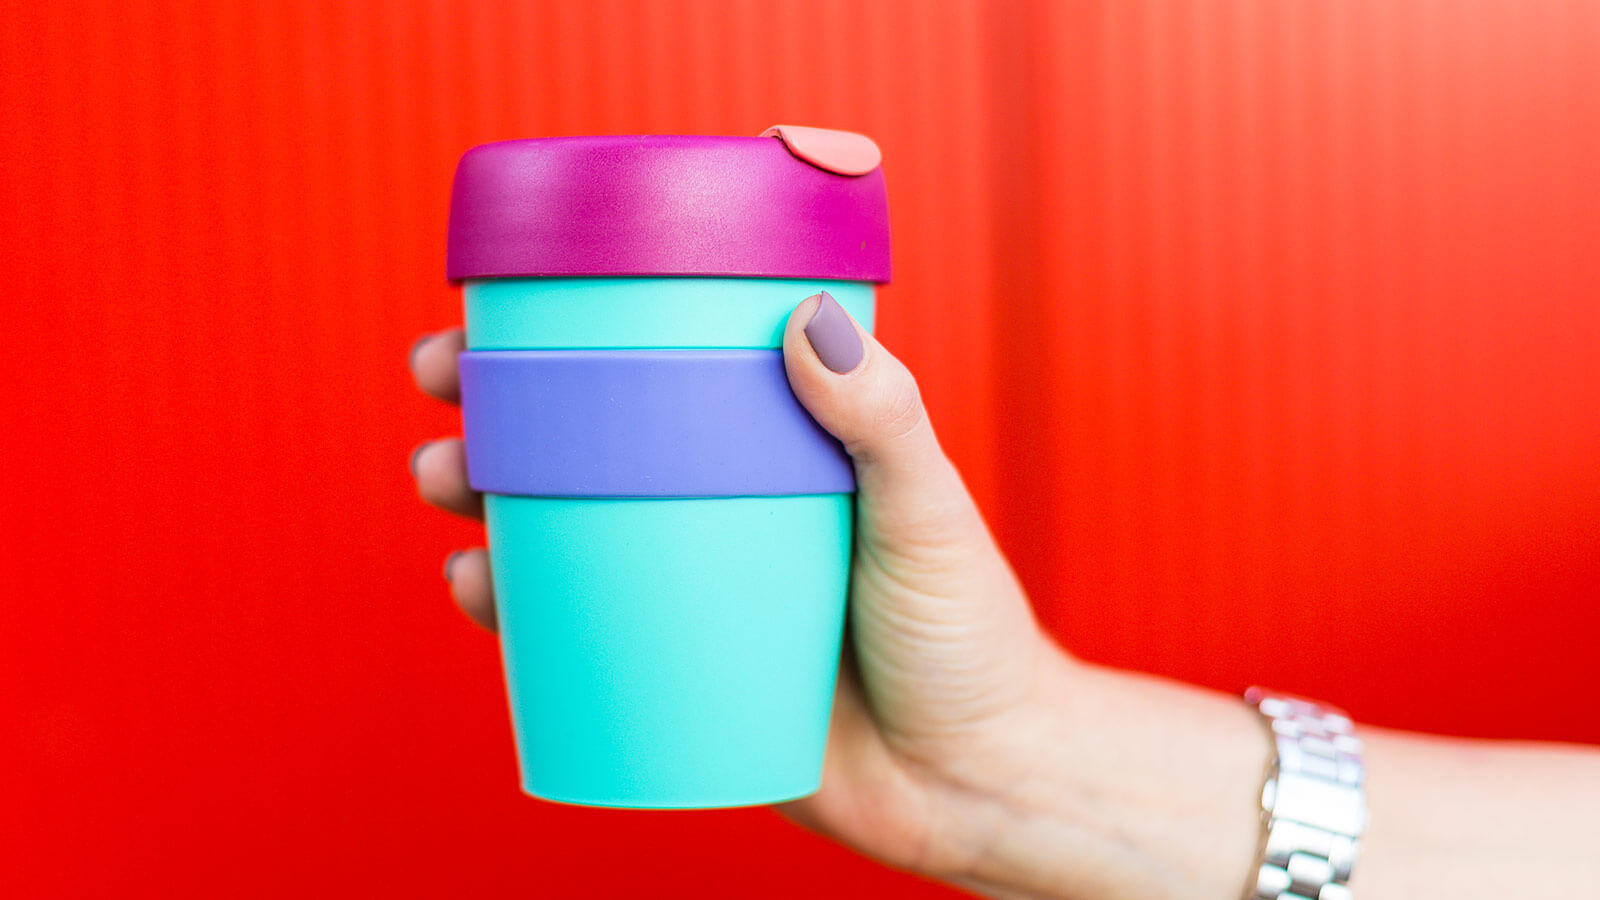 KeepCup Launches Innovative Cup-To-Bottle Kit